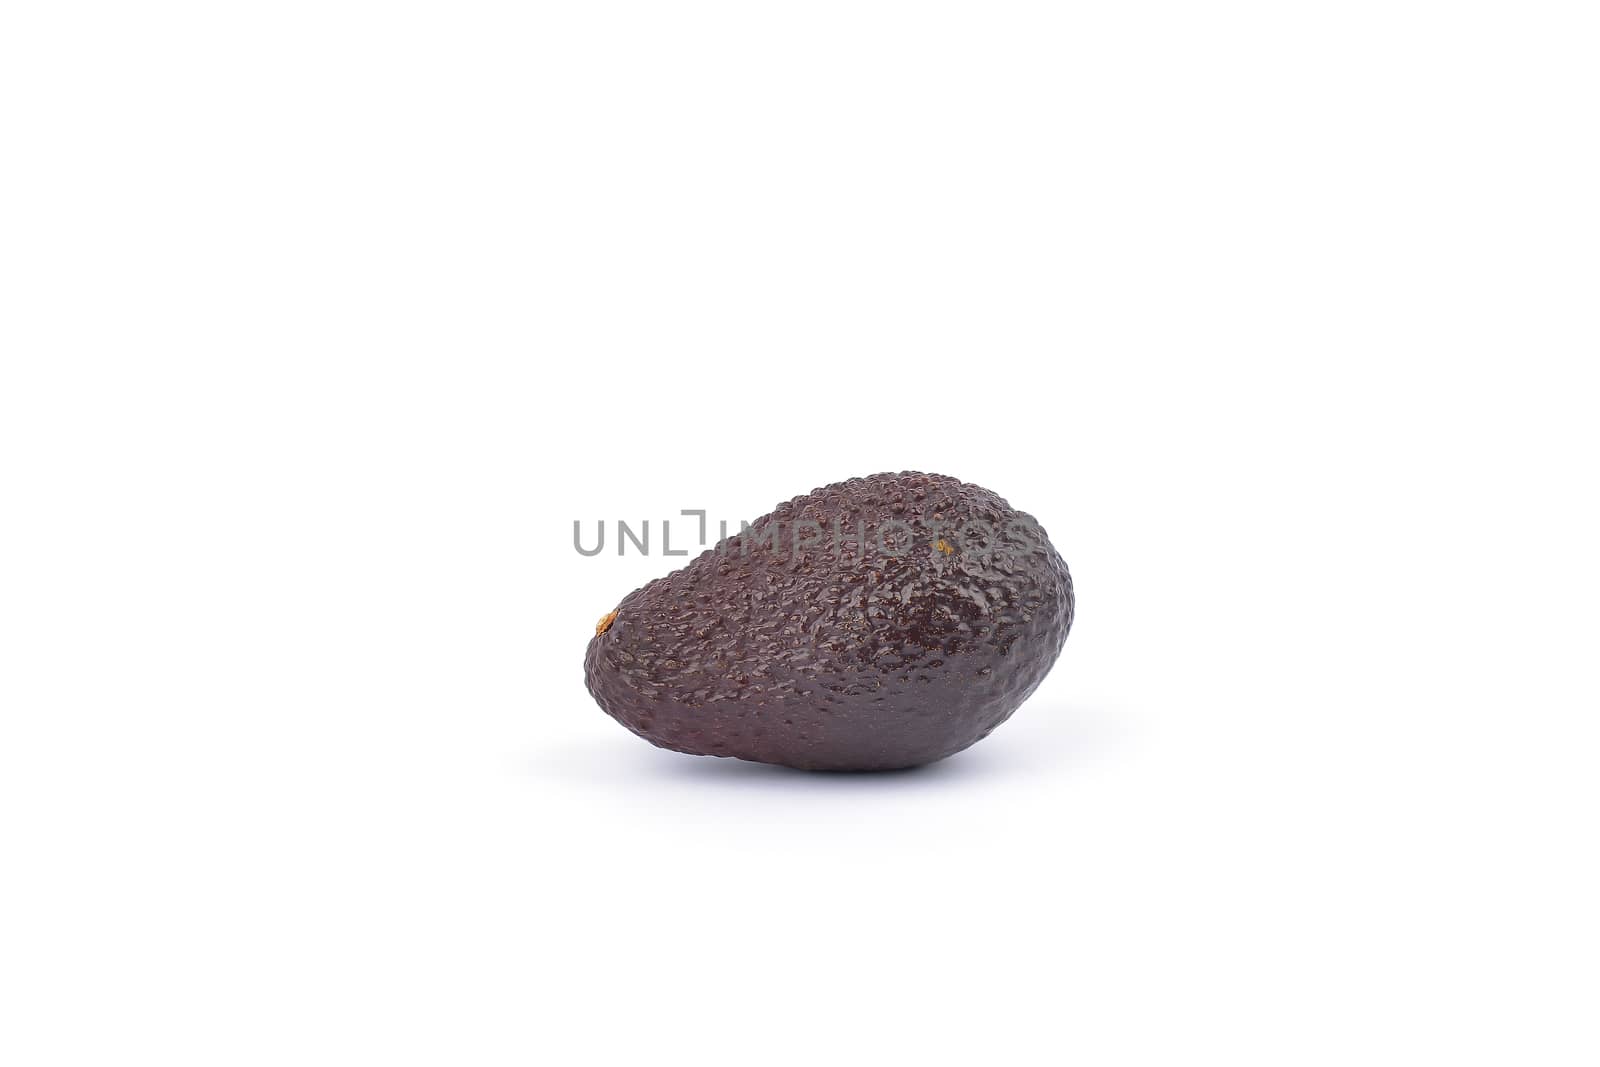 Avocado on a white background. by constantinhurghea